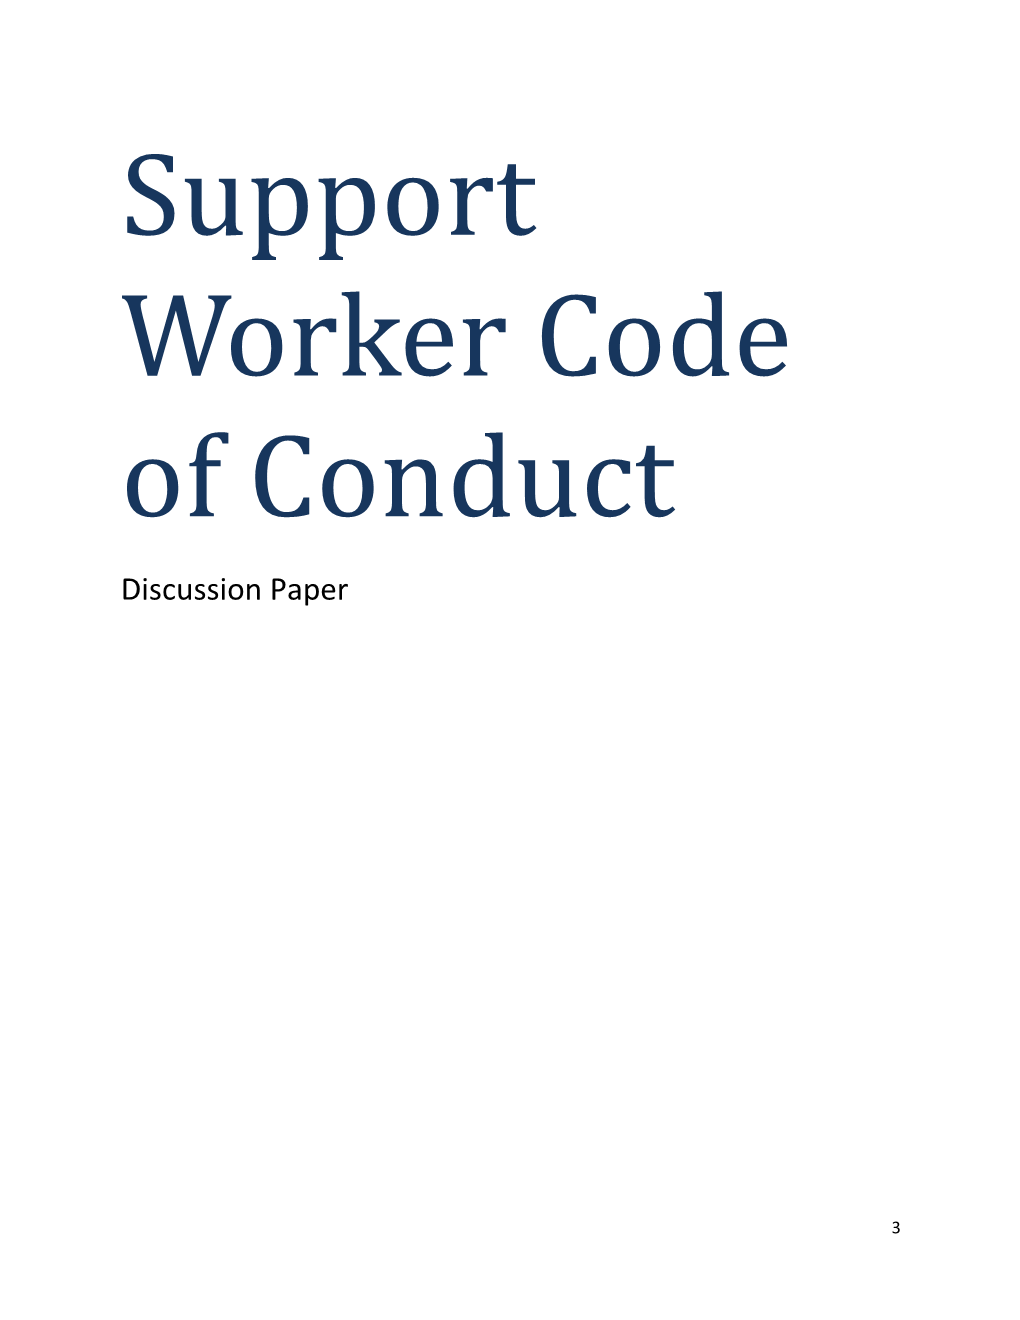 Support Worker Code of Conduct